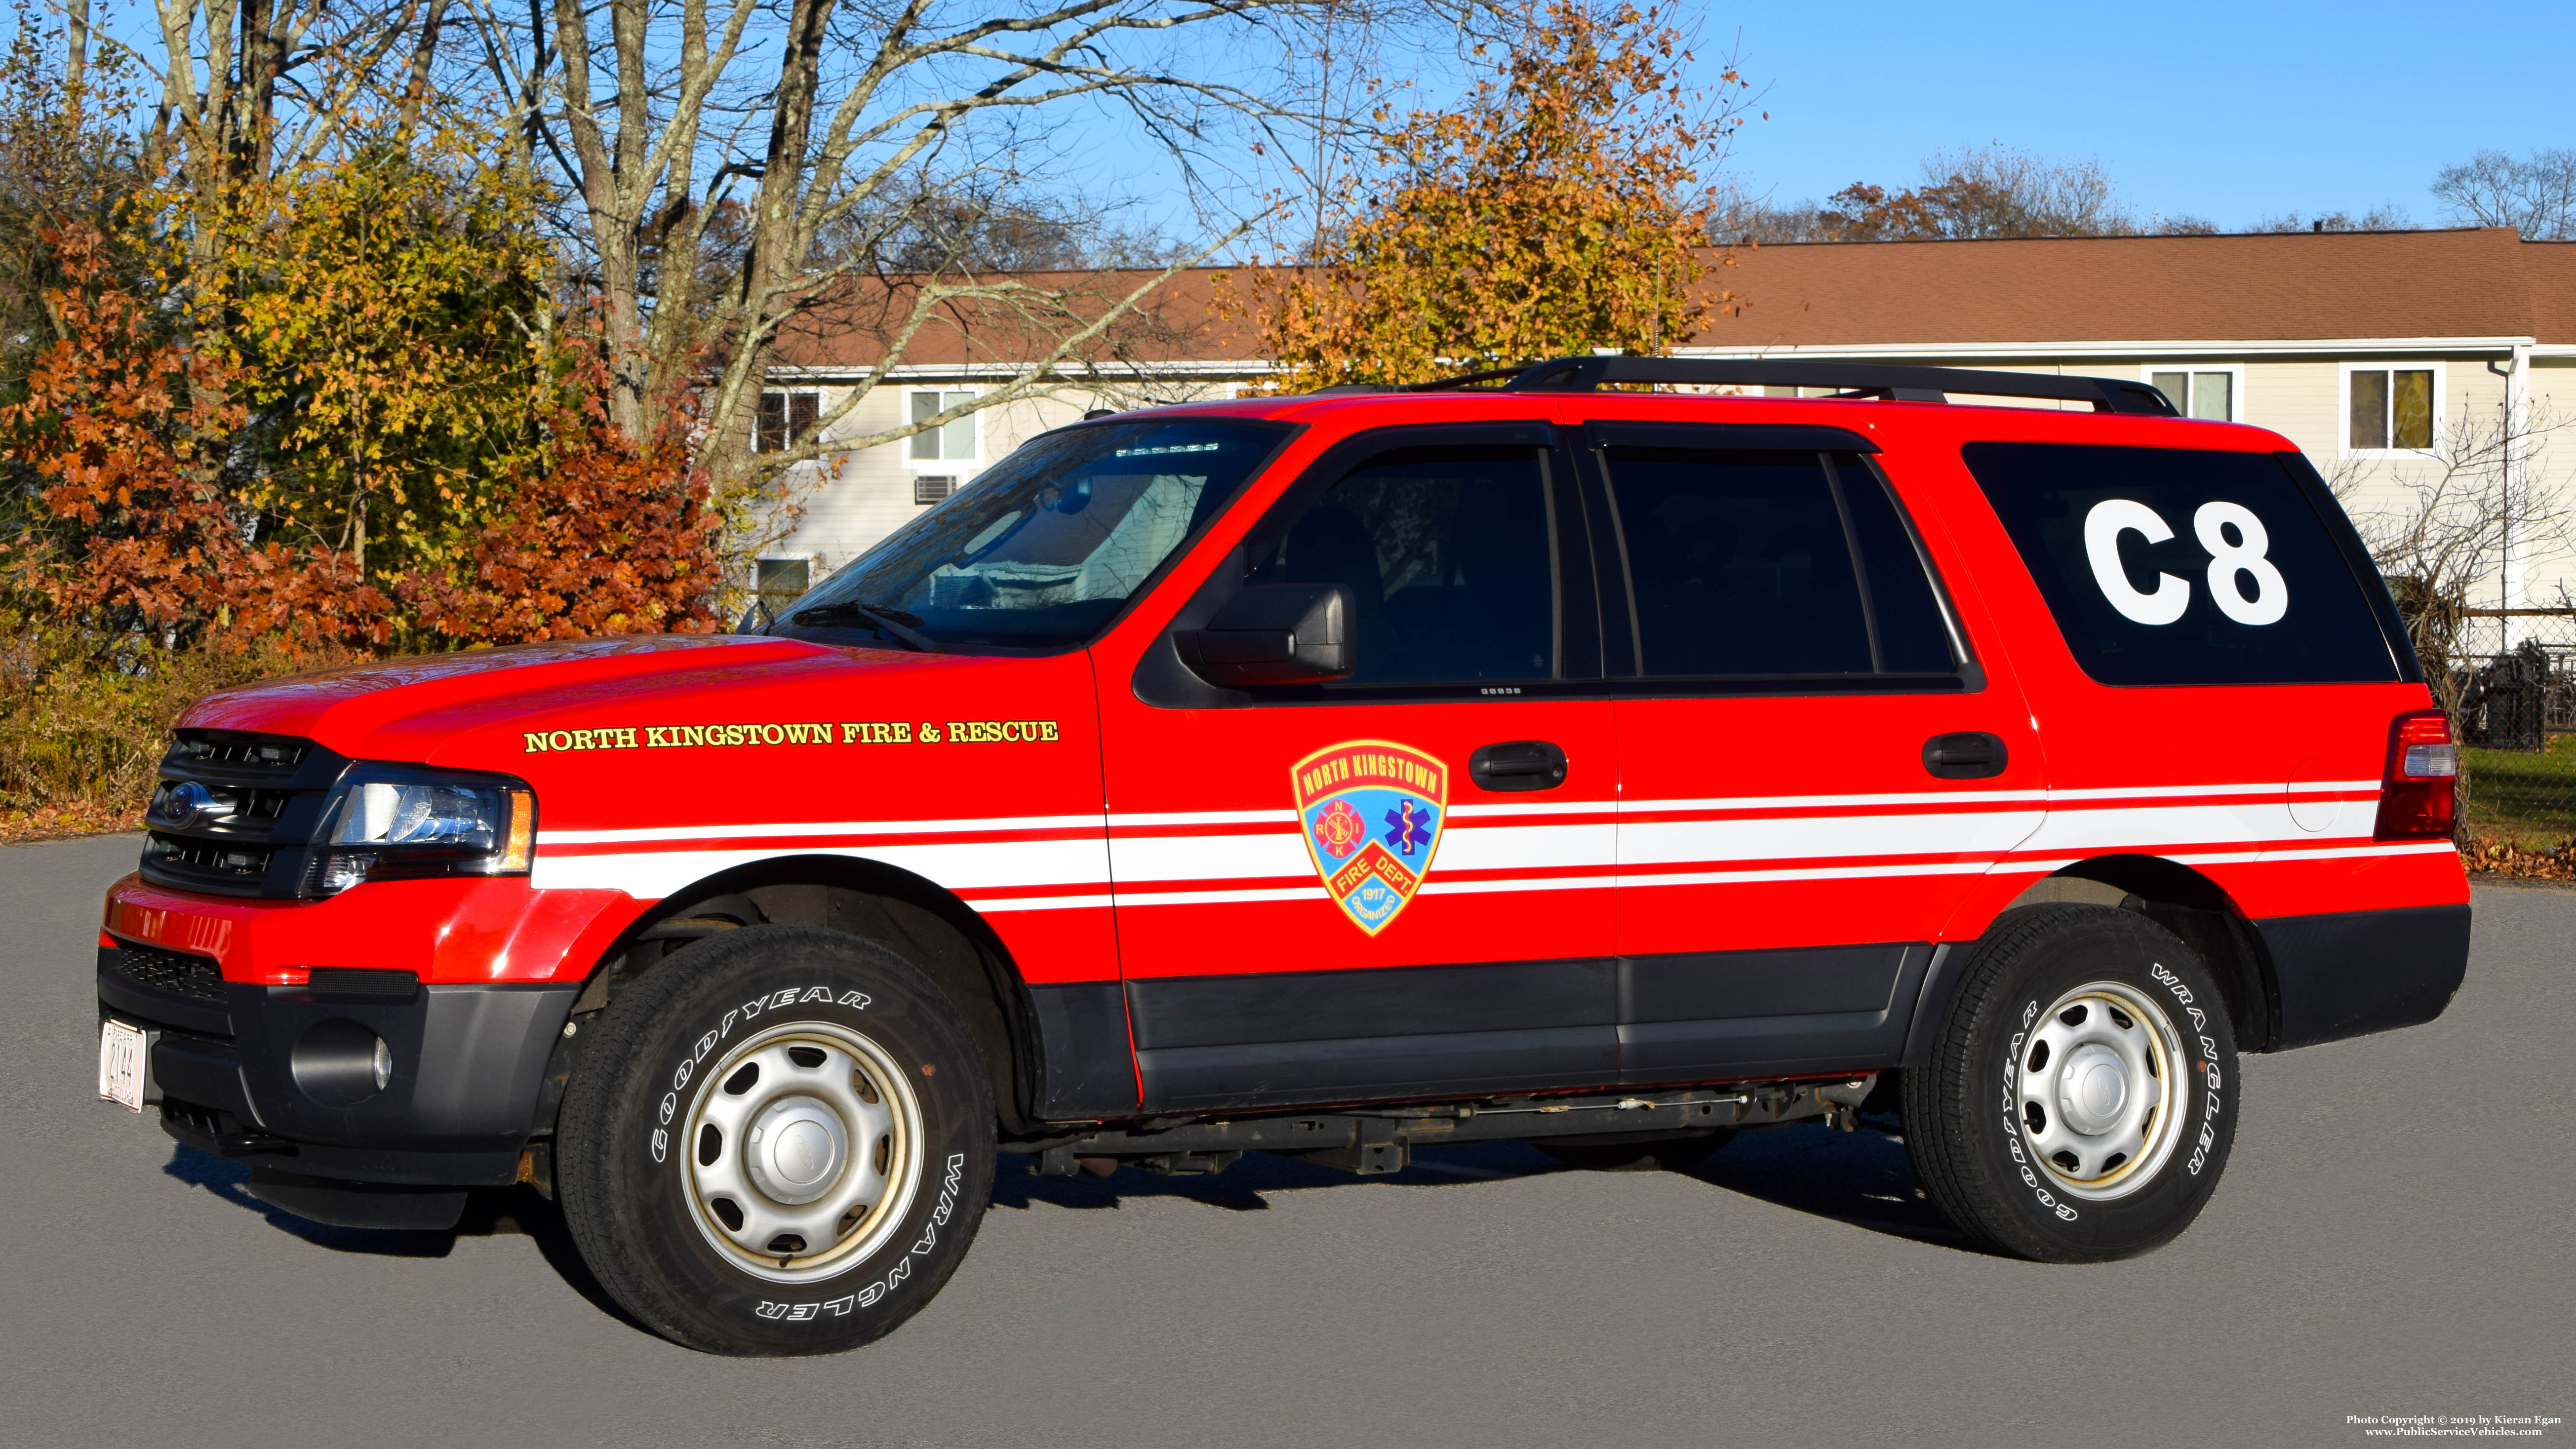 A photo  of North Kingstown Fire
            Car 8, a 2016 Ford Expedition             taken by Kieran Egan